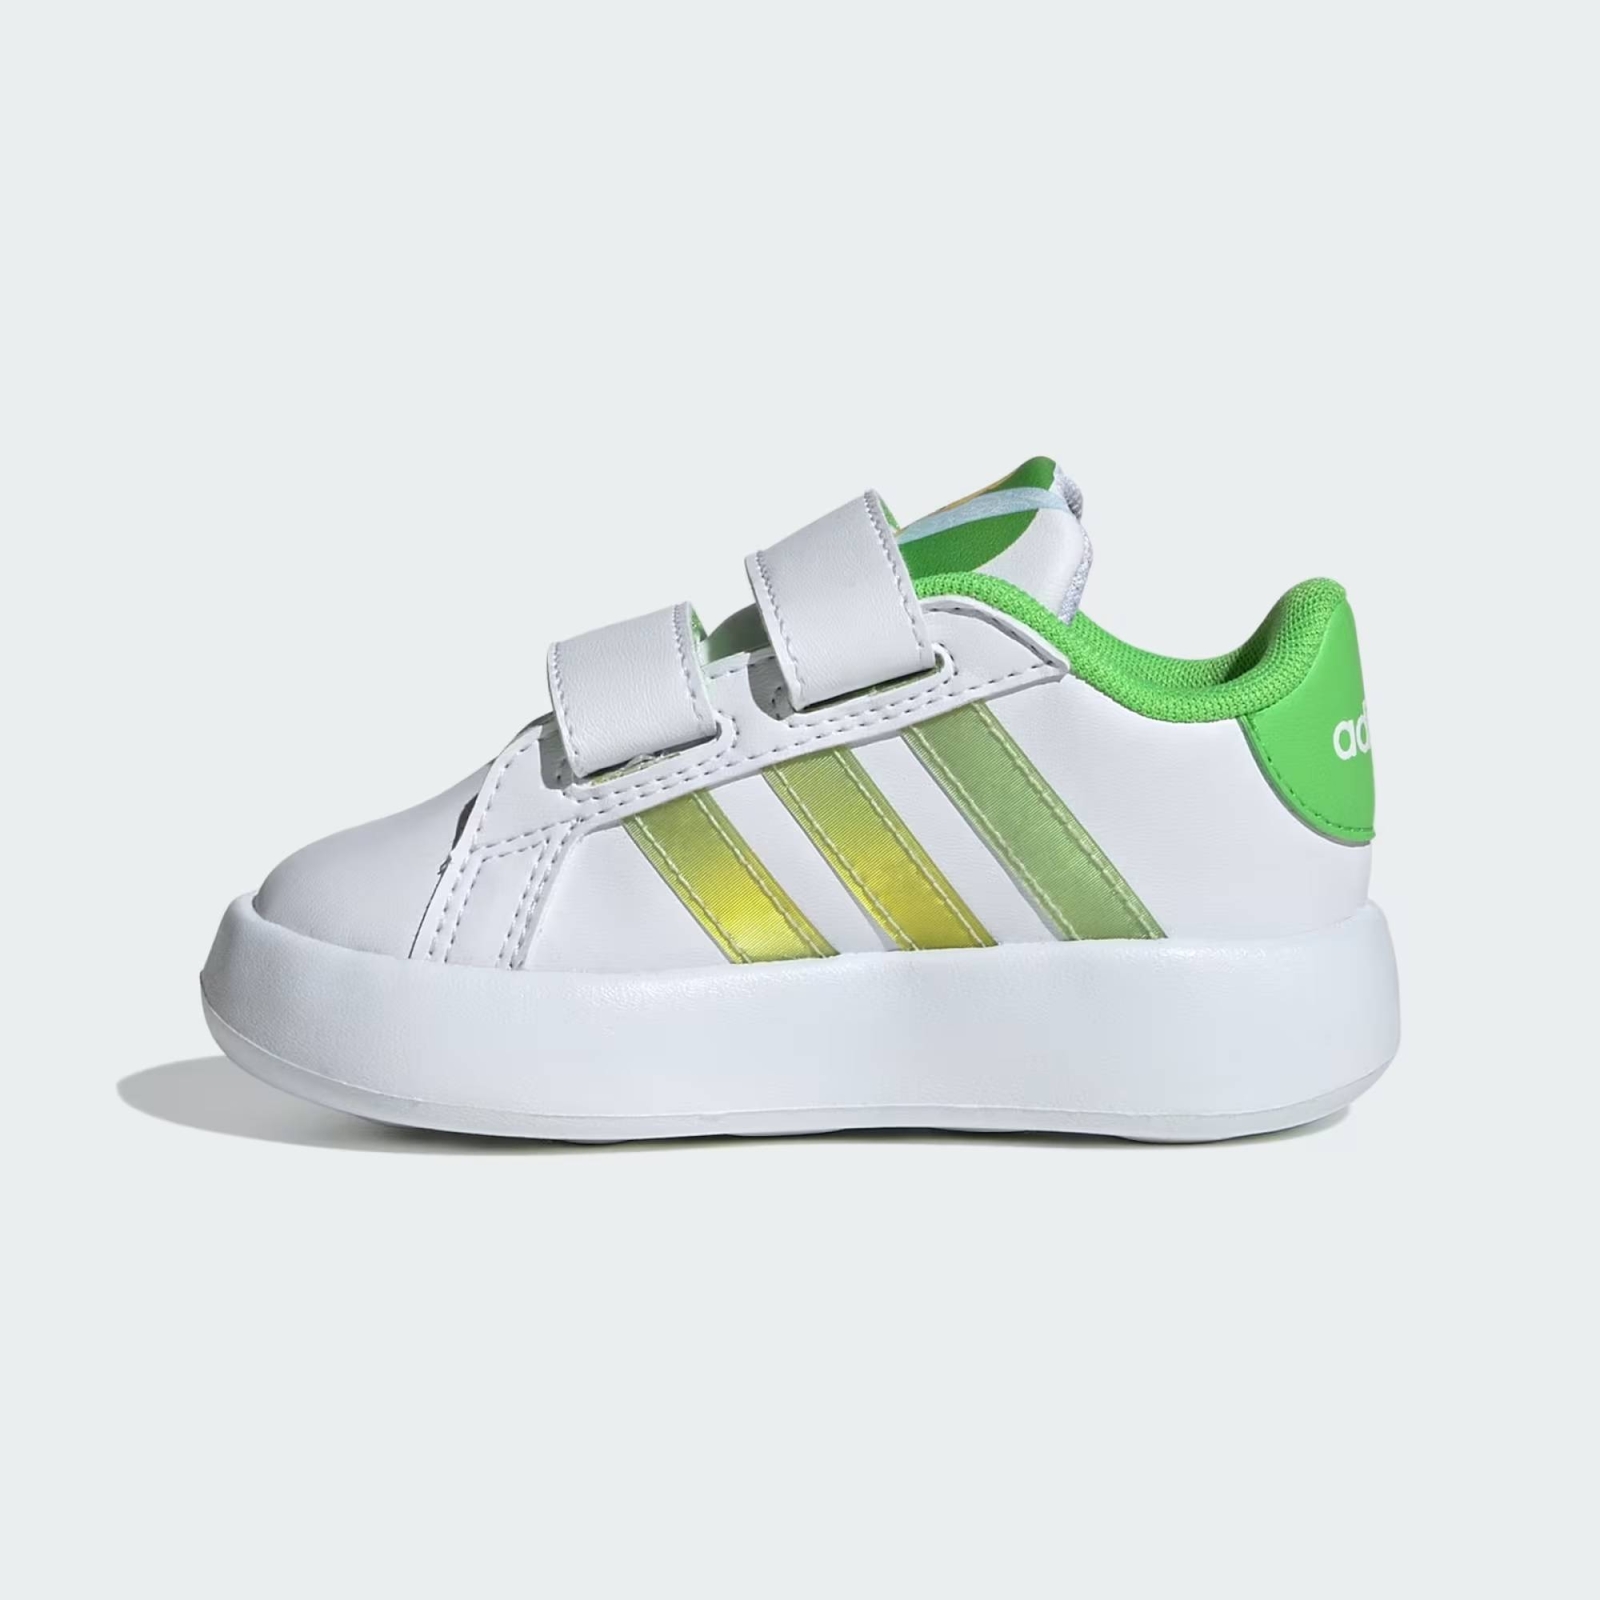 ADIDAS GRAND COURT 2.0 TINKERBELL INFANTS